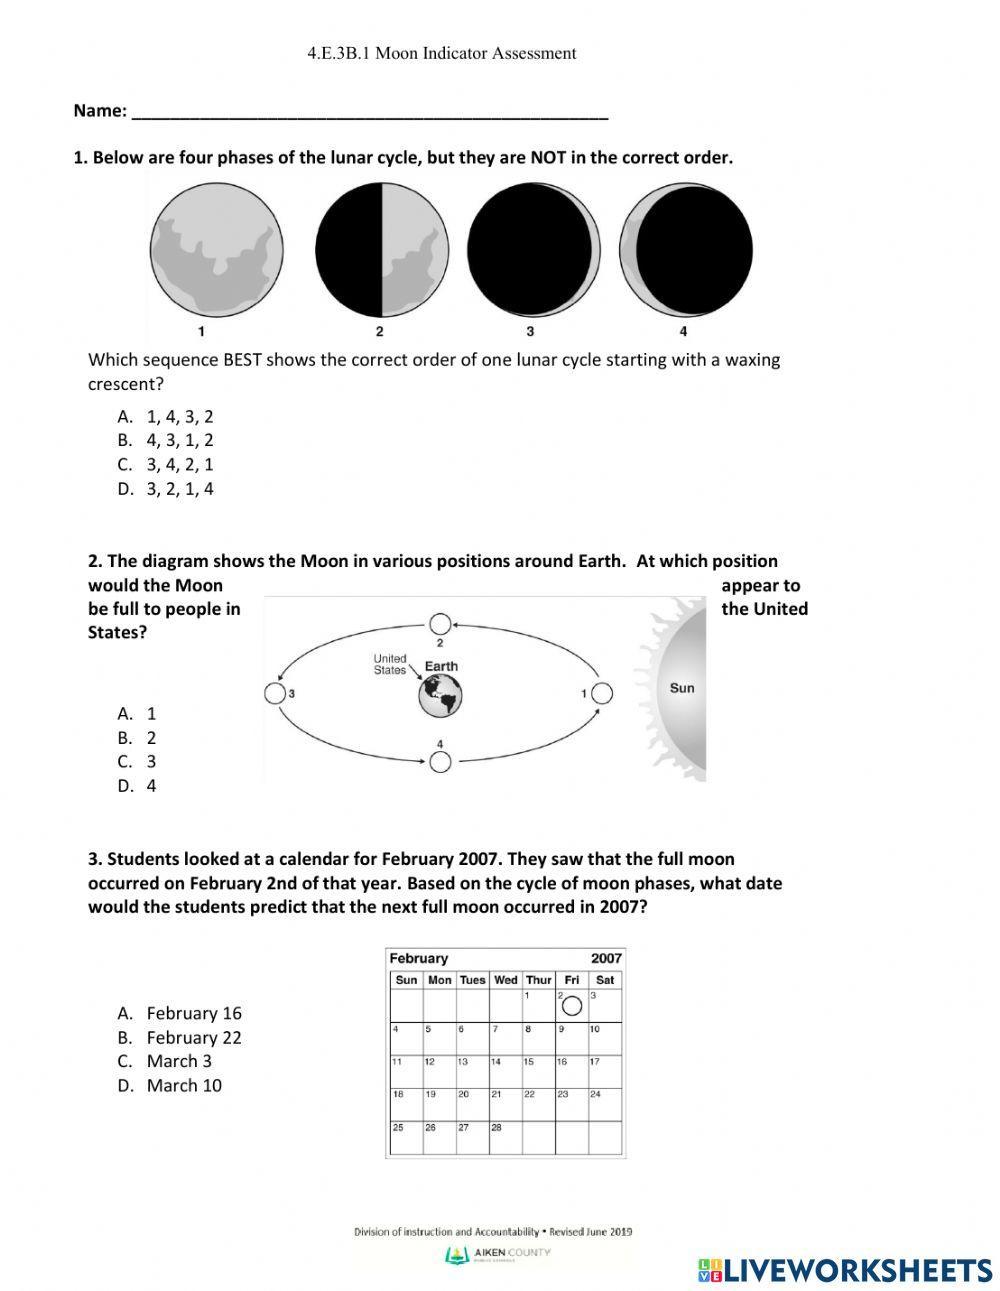 Moon Phases Indicator Assessment